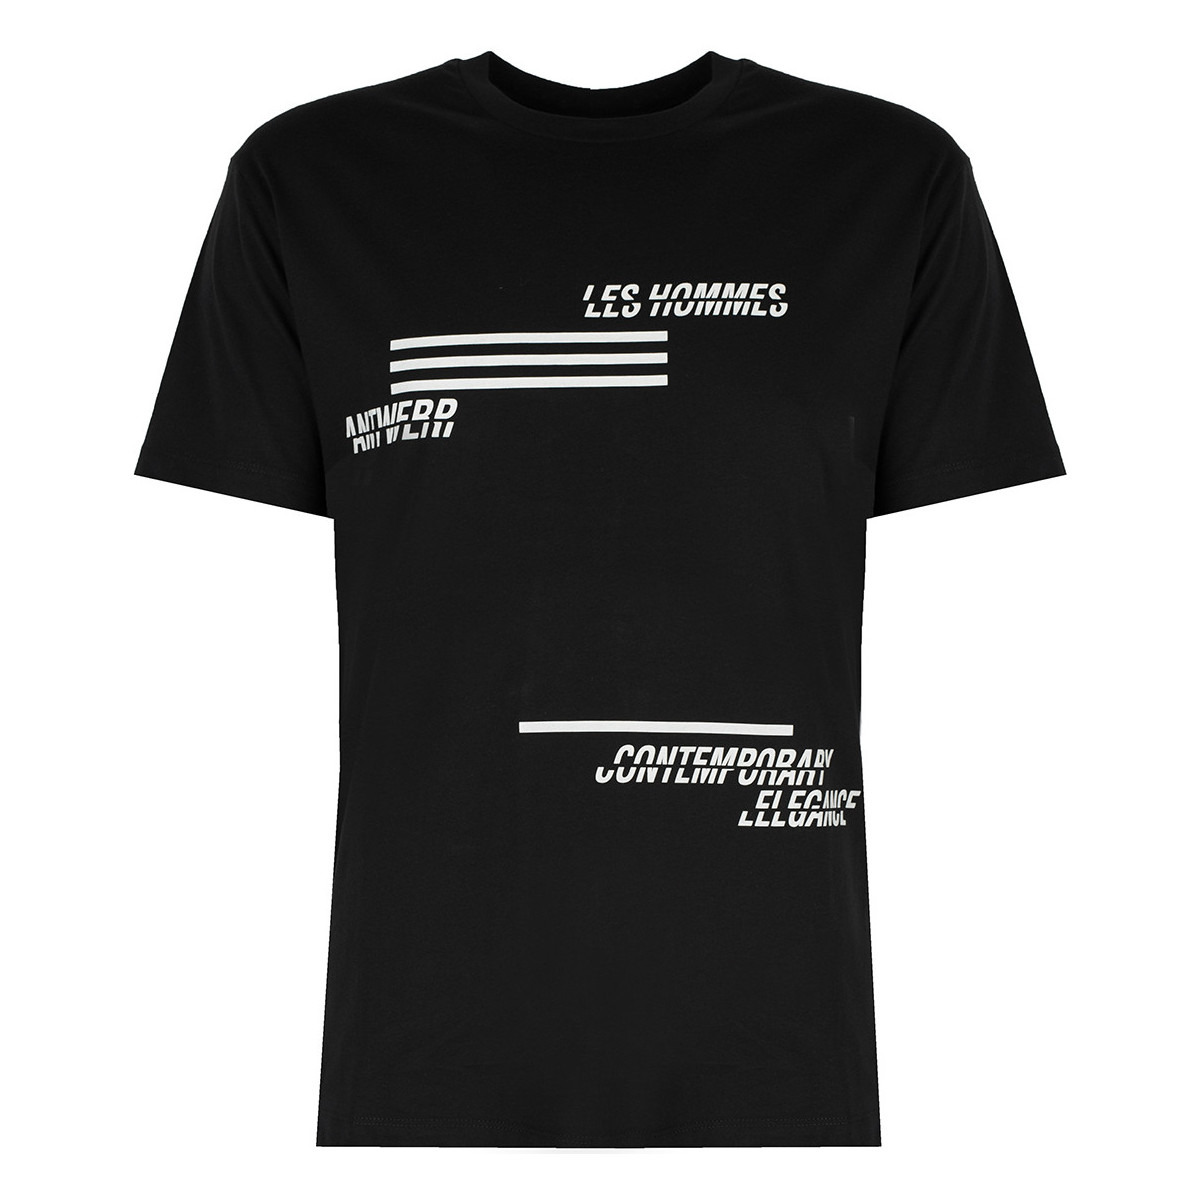 Les Hommes T-Shirt in Black at Spartoo GOOFASH